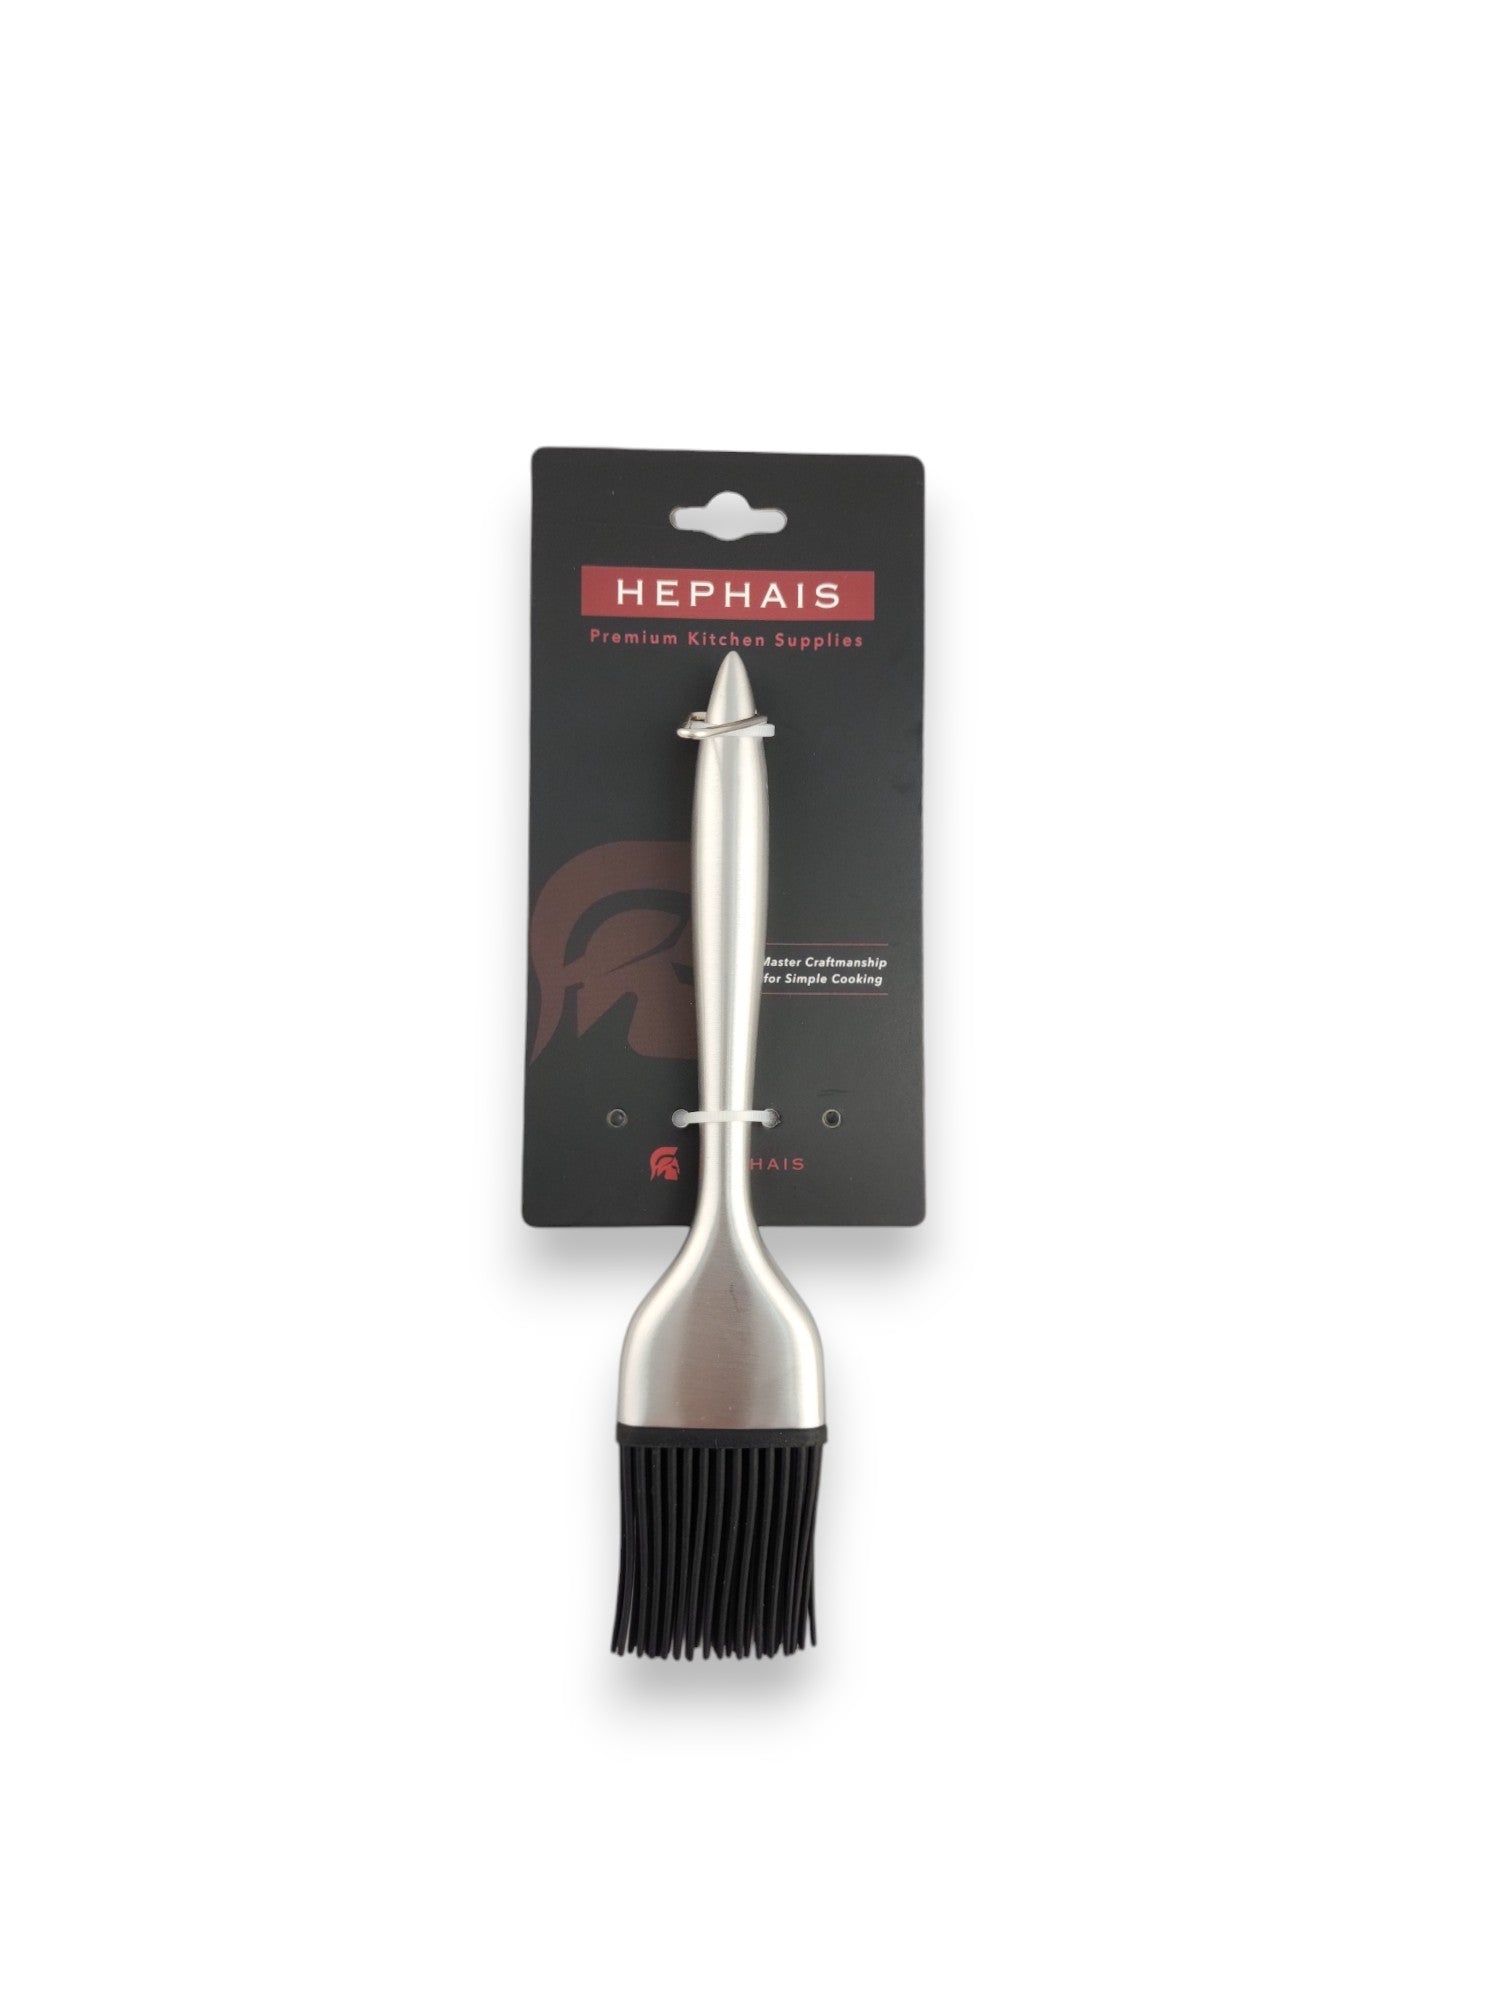 Stainless Steel Silicone Basting Brush: Precision Coating Tool